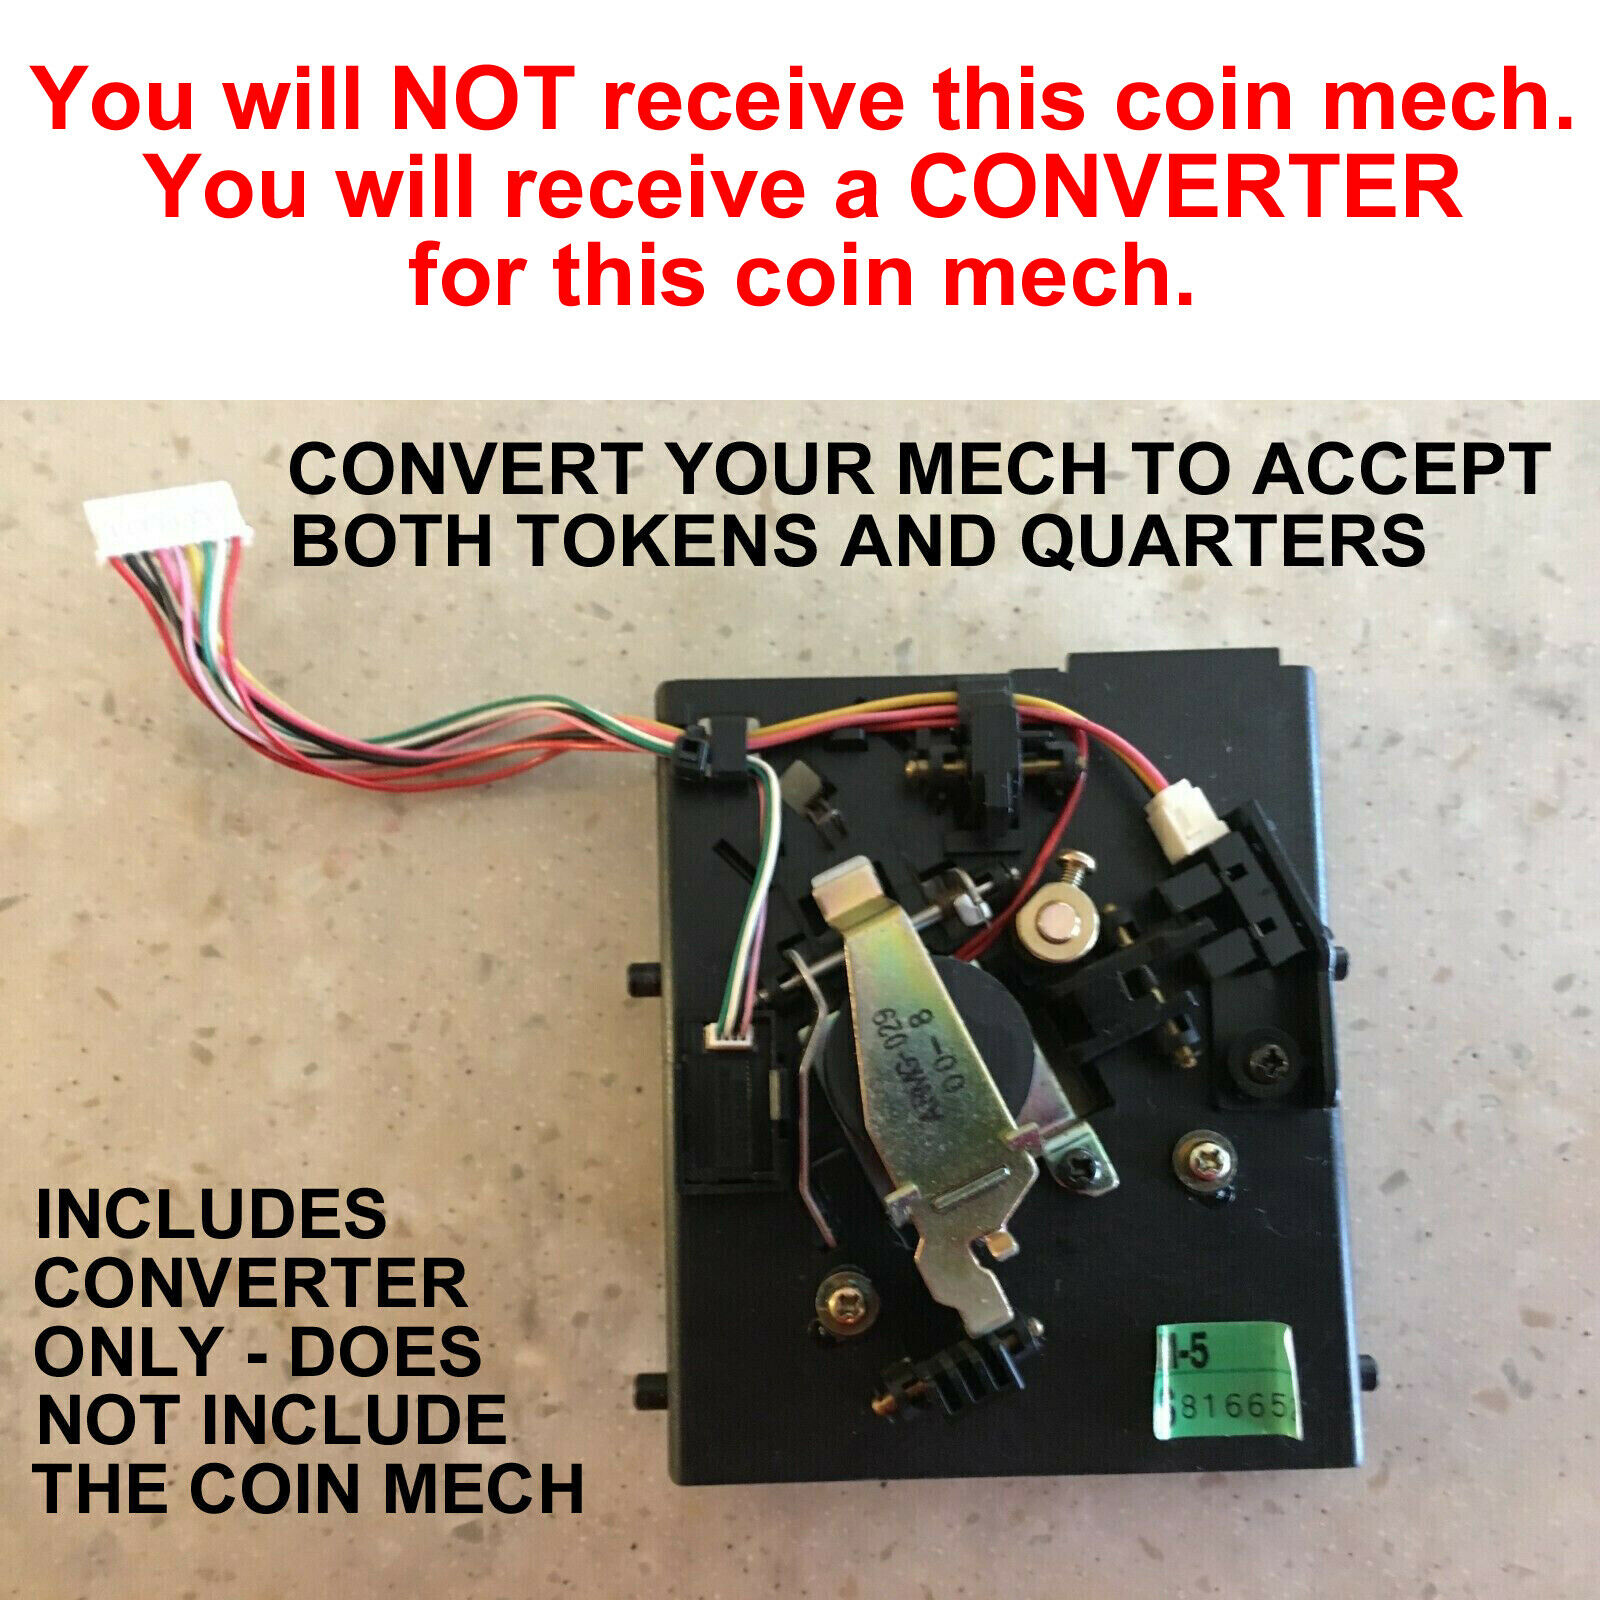 $.25 CONVERTER FOR PACHISLO SLOT MACHINES - Converter ONLY not the coin mech